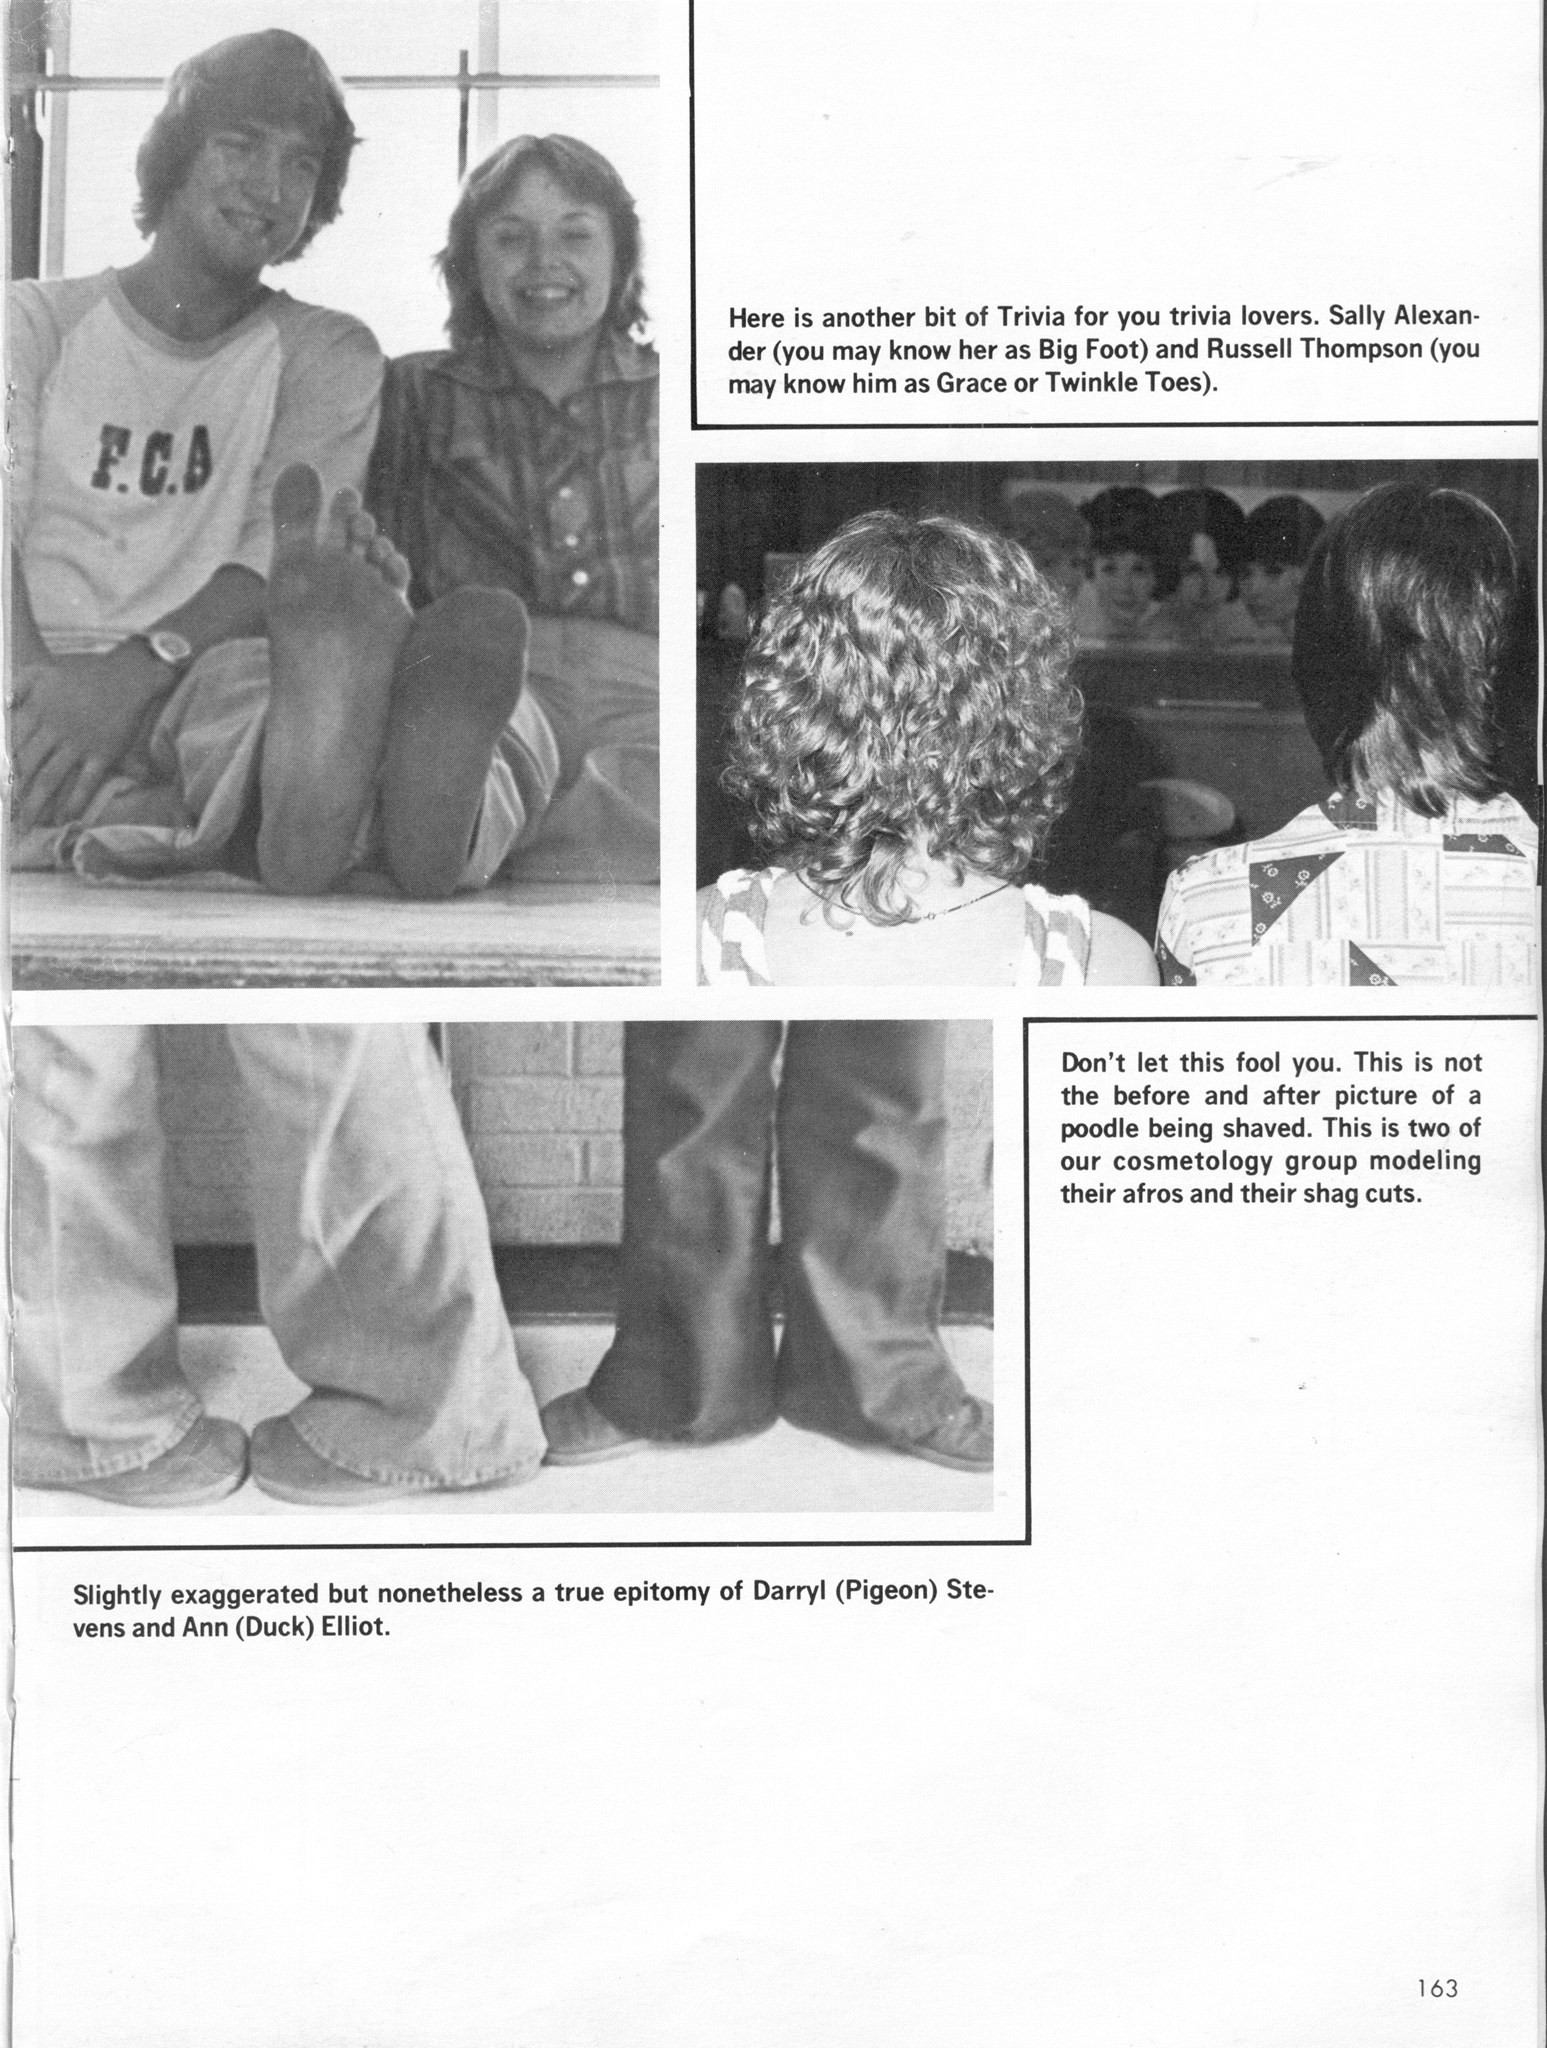 ../../../Images/Large/1979/Arclight-1979-pg0163.jpg